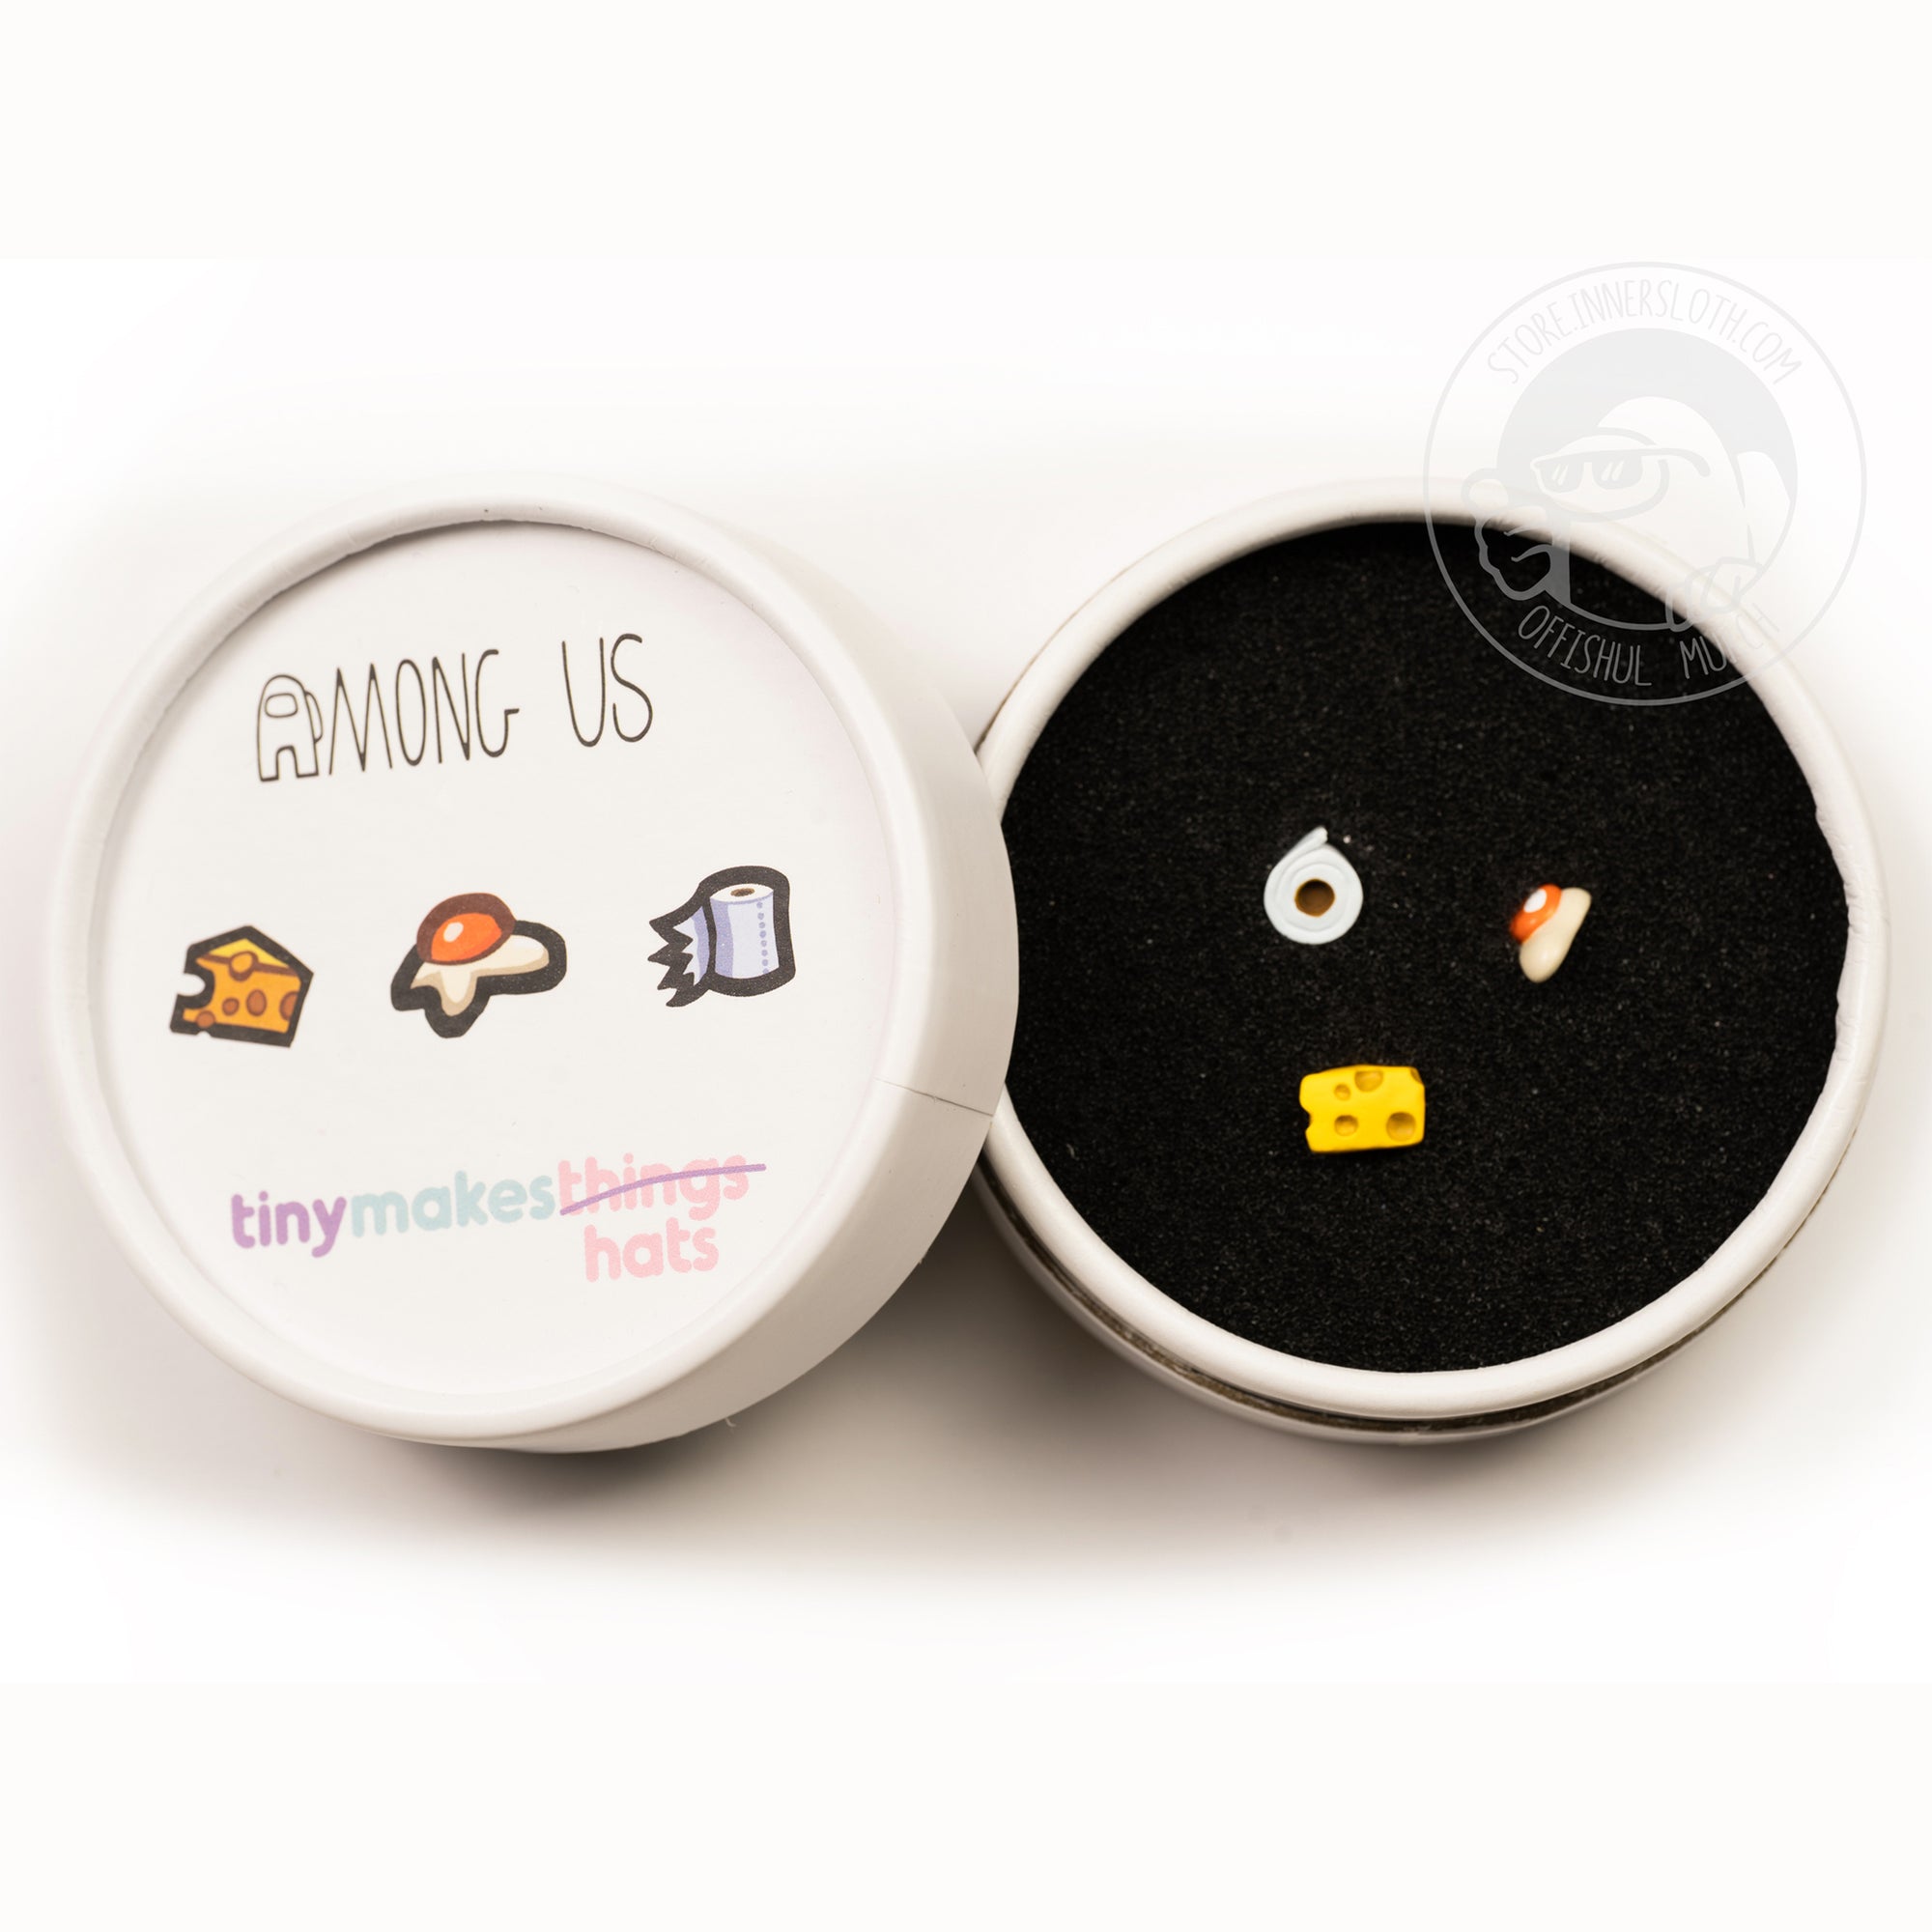 A product photo from above of the white container the keycaps come in. The top of the cardboard cylinder shows illustrations of each of the hats. The container is open, showing the fried egg, cheese wedge, and toilet paper on a black spongey material.